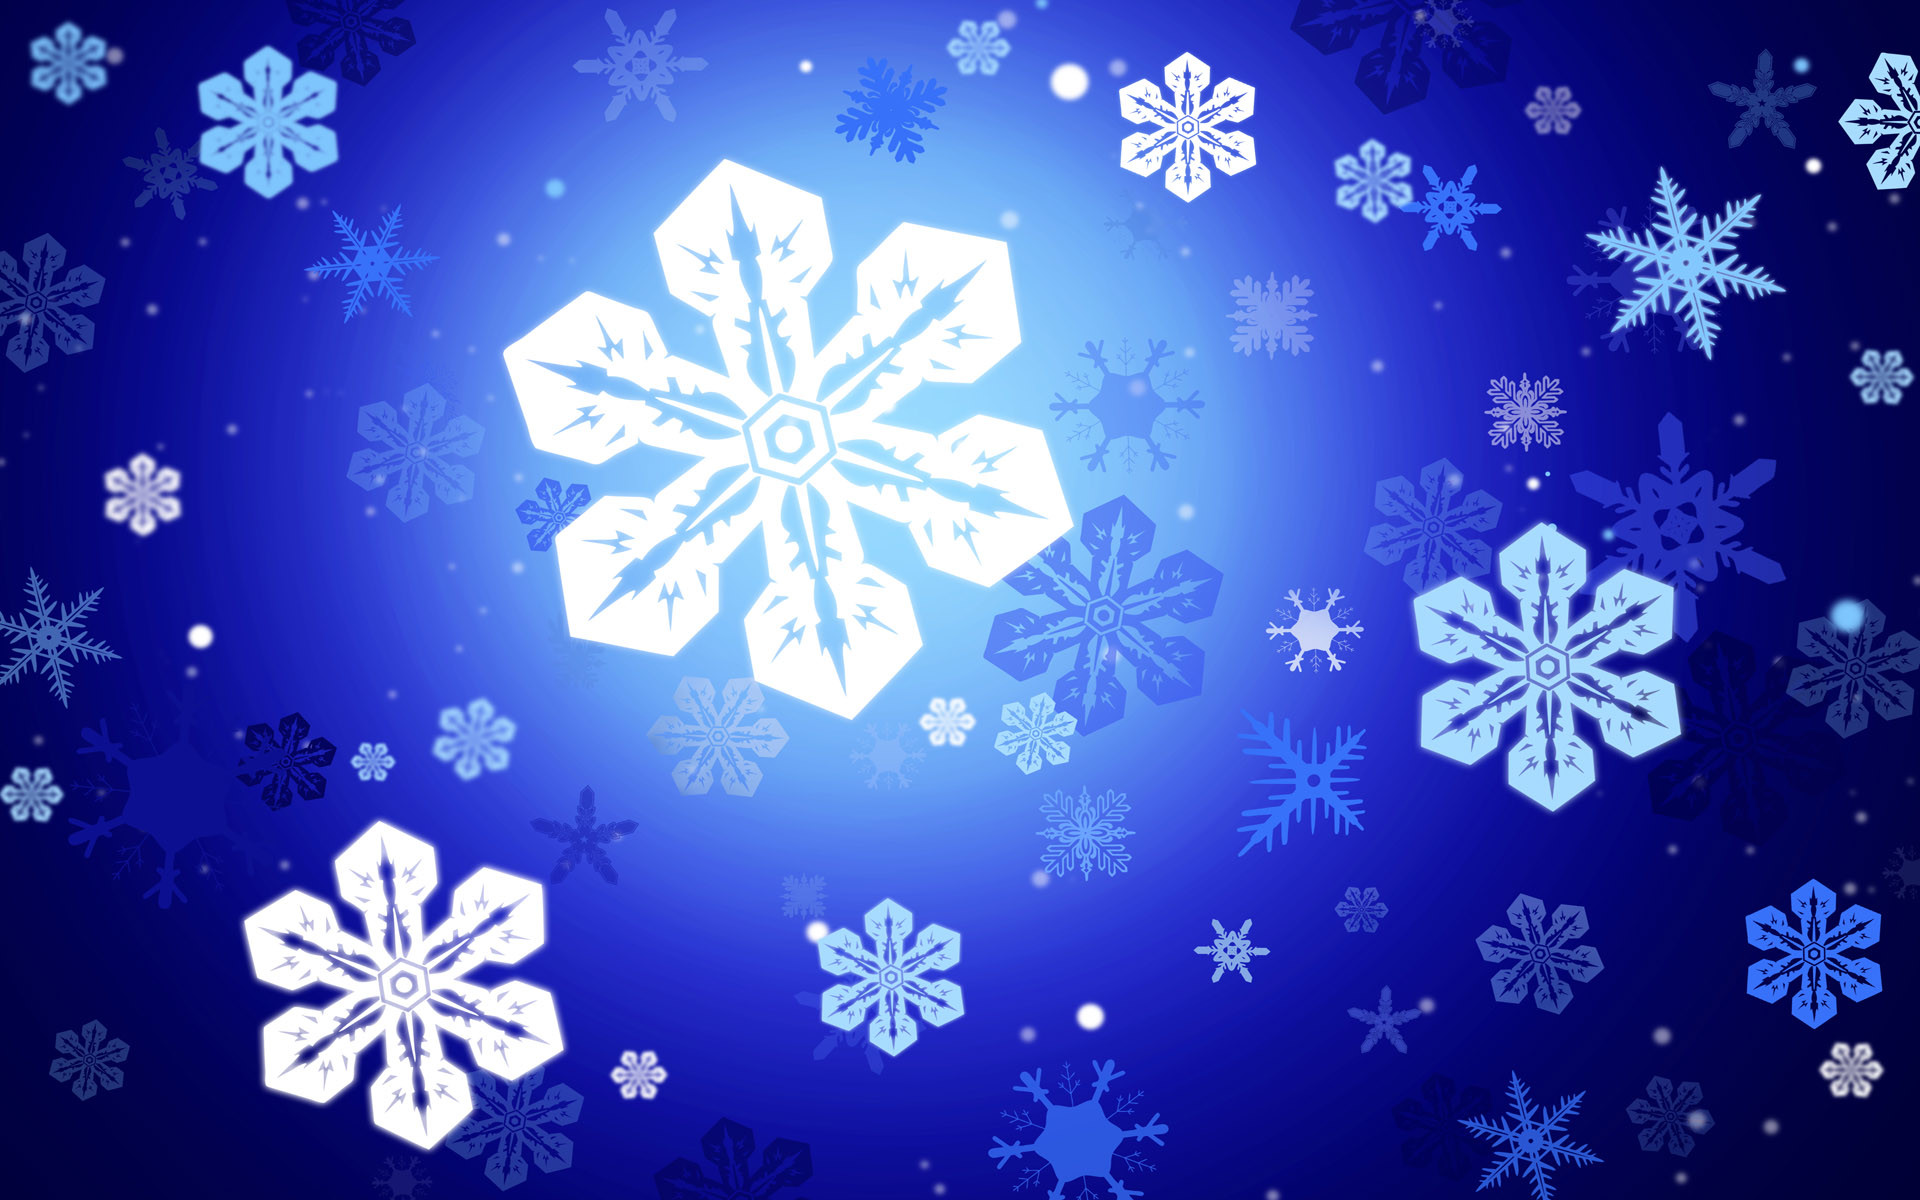 Falling Snow Wallpaper Animated Snow falling a